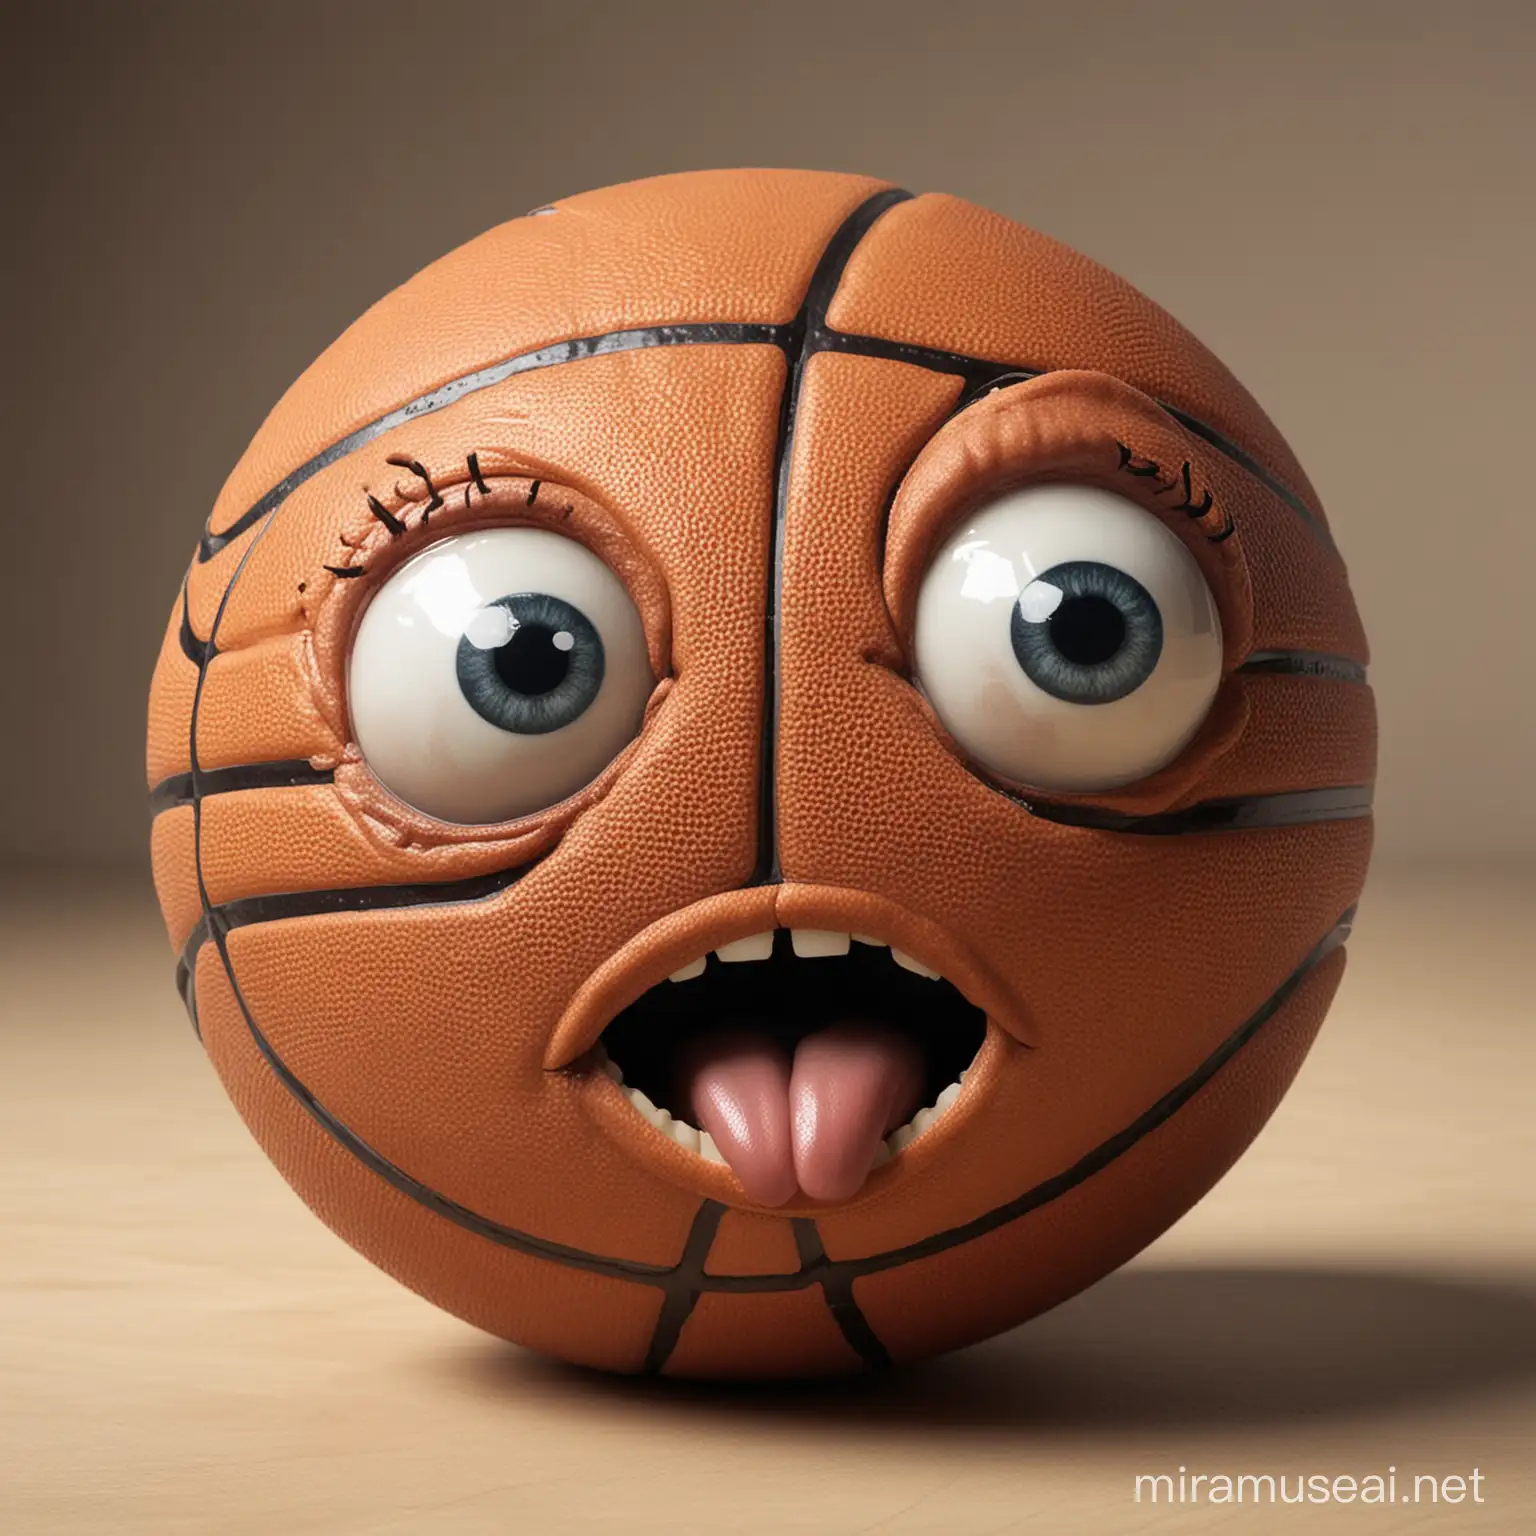 Basketball with Expressive Features Playful Ball with Eyes and Mouth